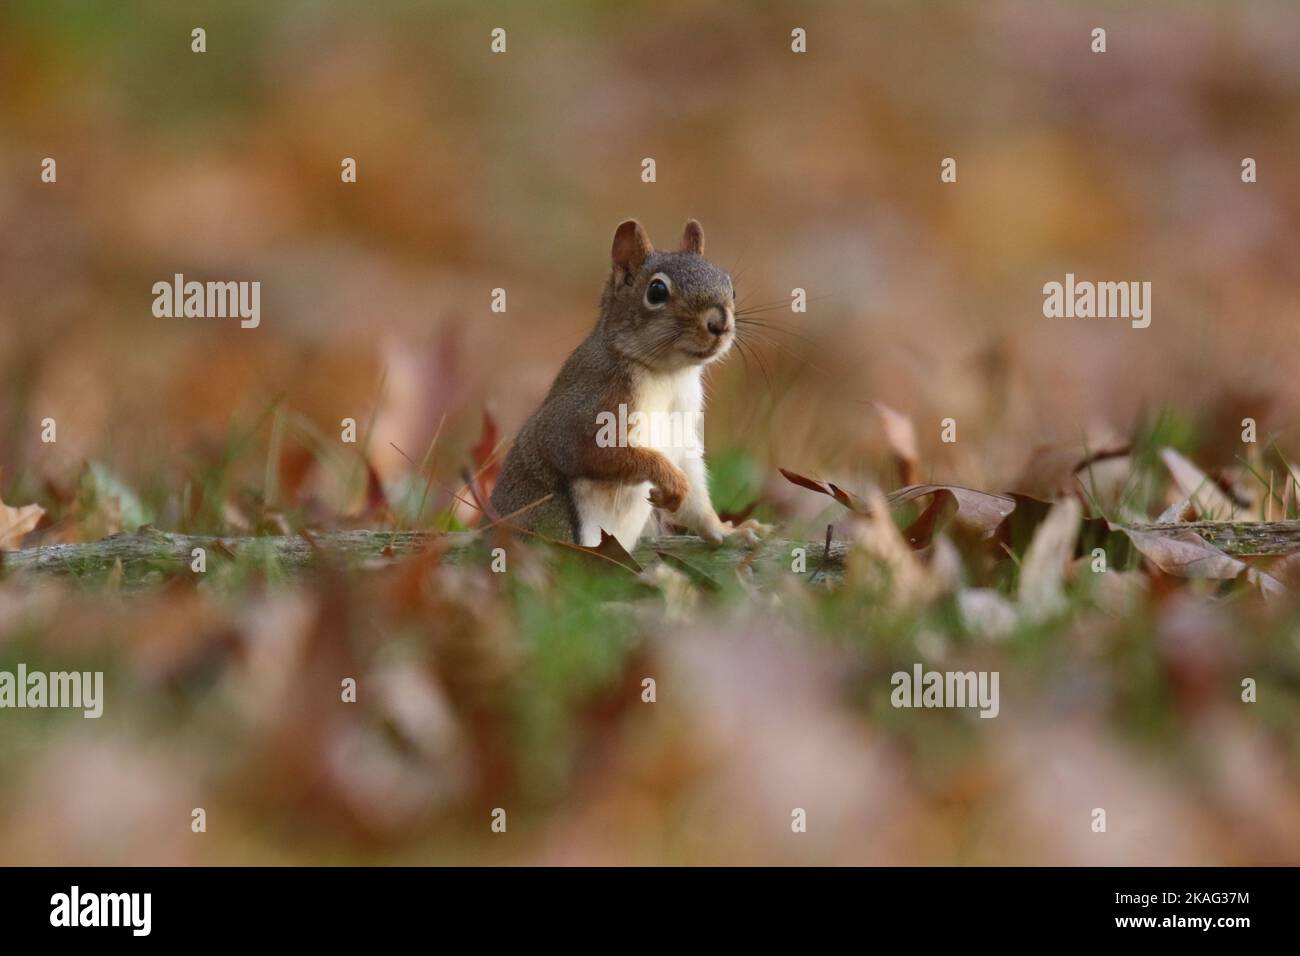 American red squirrel Tamiasciurus hudsonicus out looking for acorns in Fall in a backyard Stock Photo